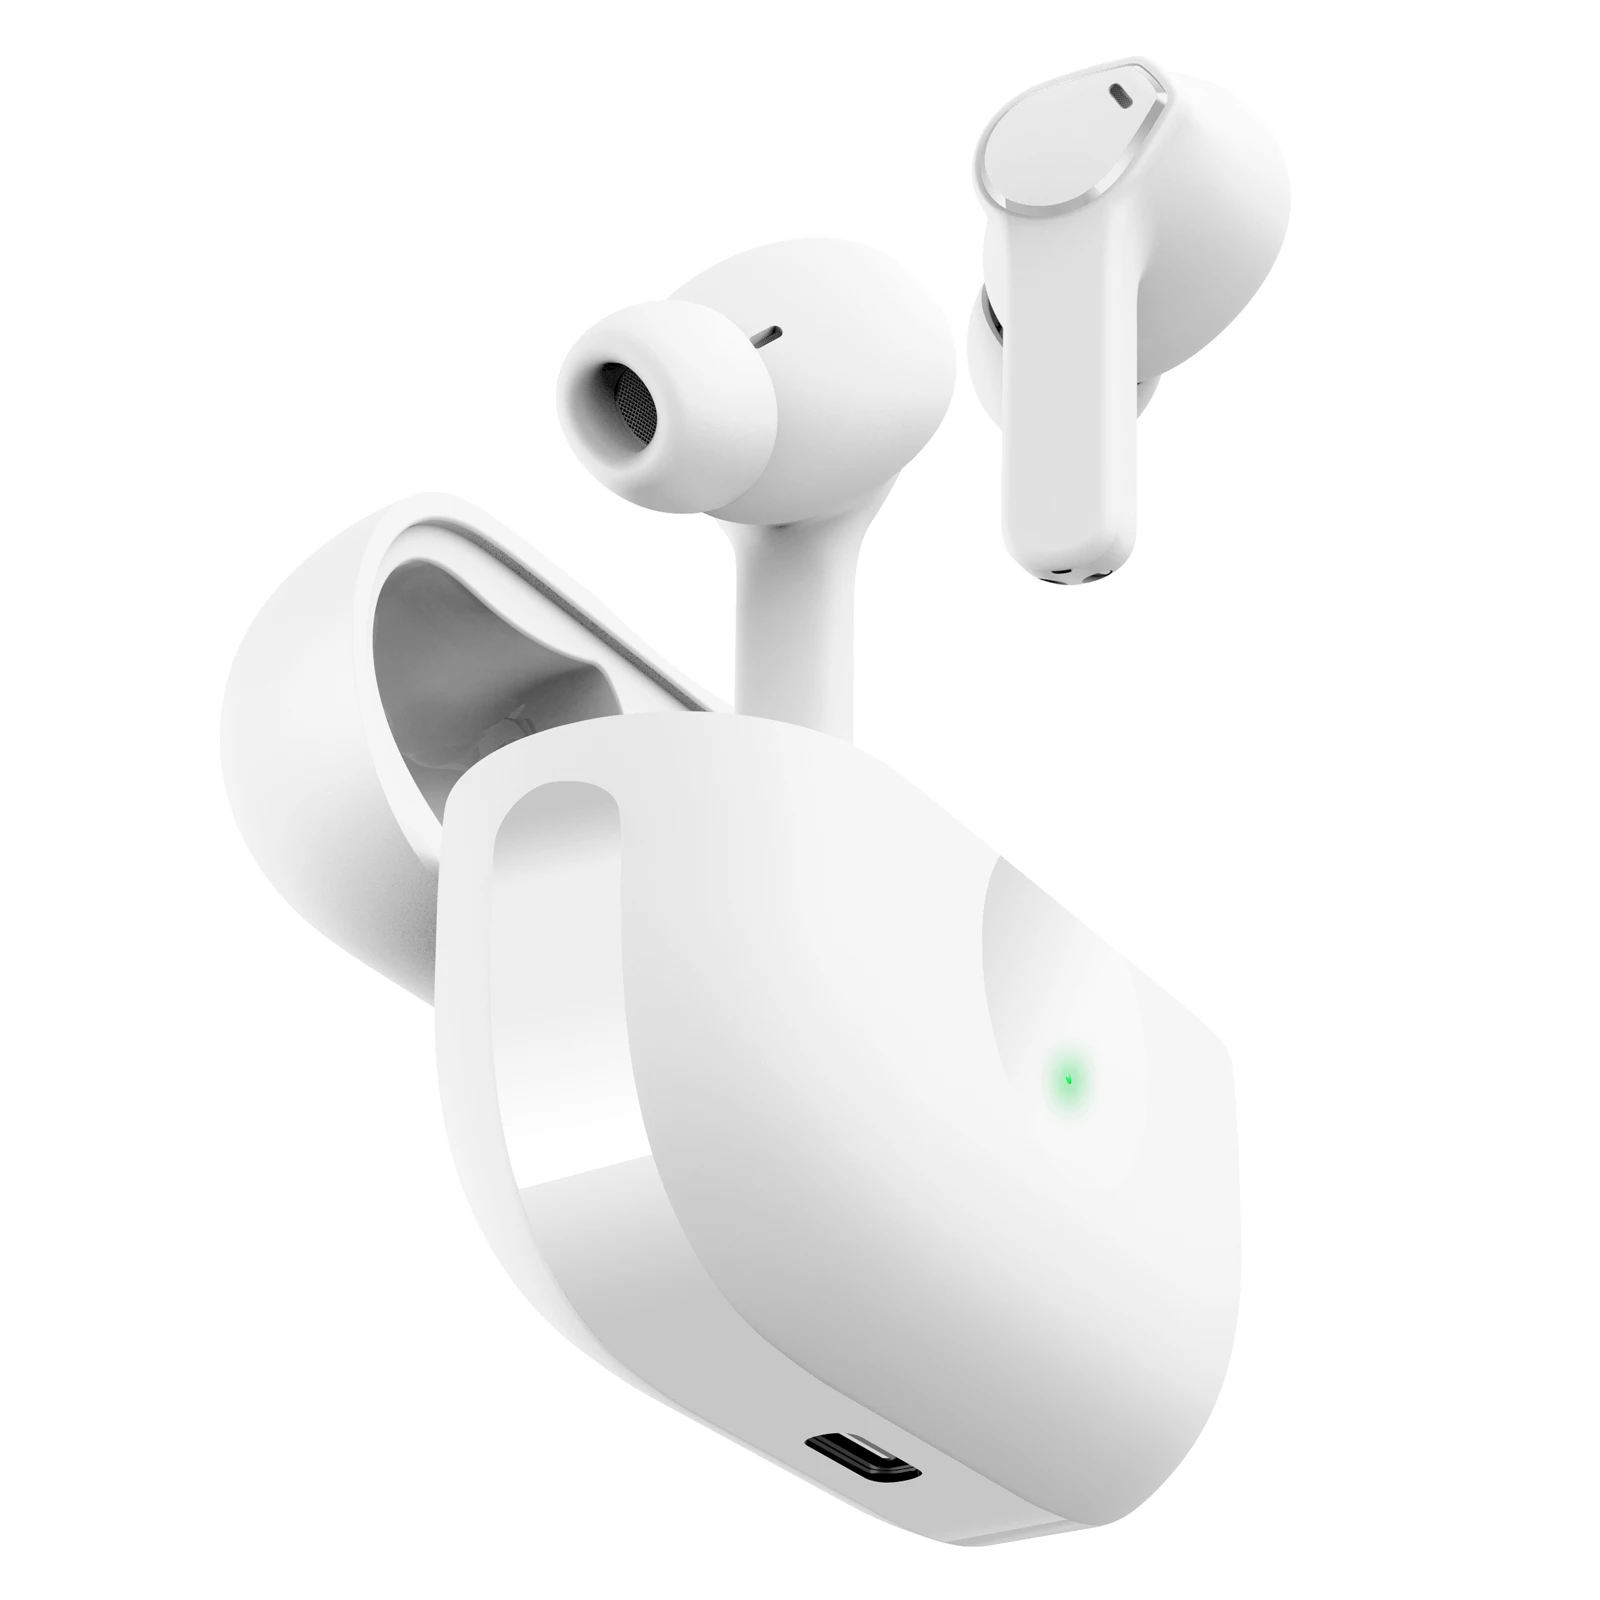 Popular good quality high-end wireless earbuds